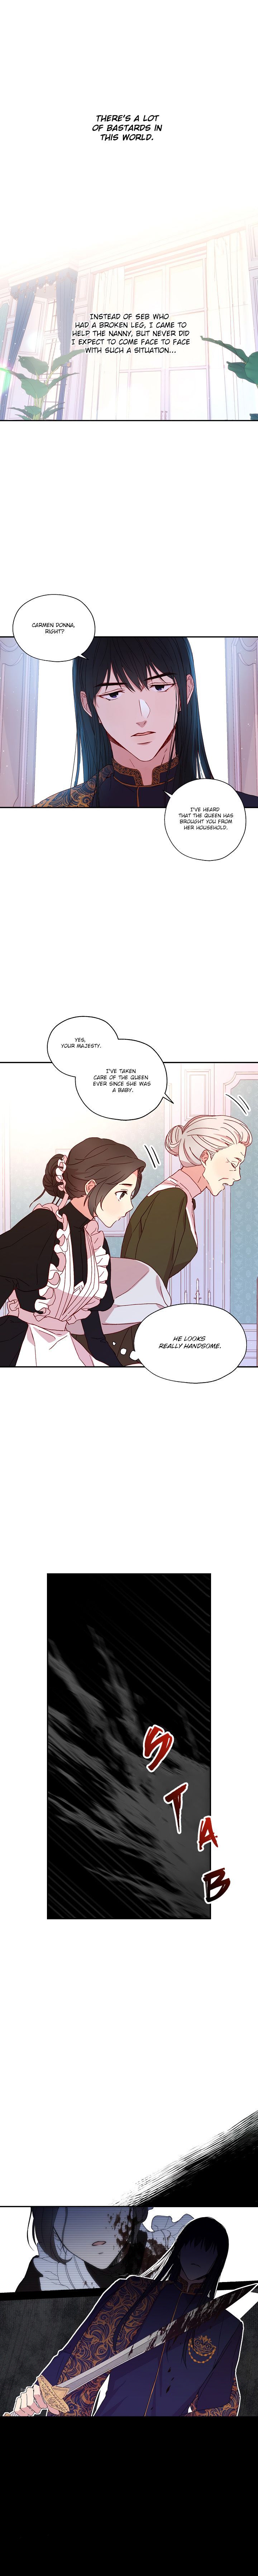 Surviving As A Maid - Chapter 5 Page 10